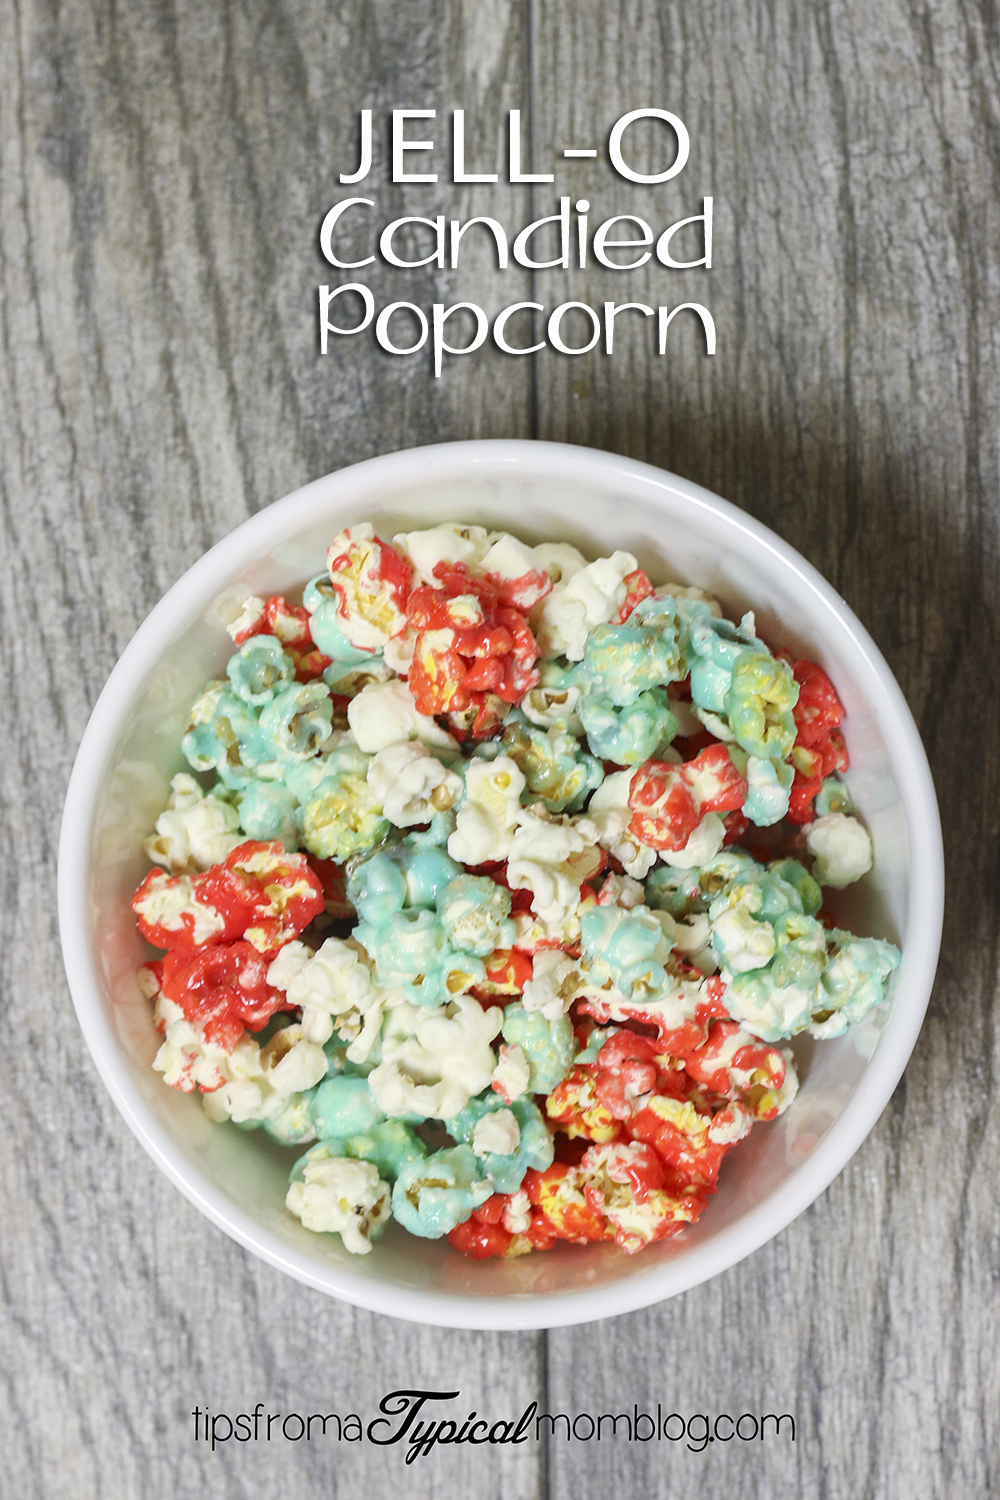 Red, White & Blue Jello Candied Popcorn- 4th of July